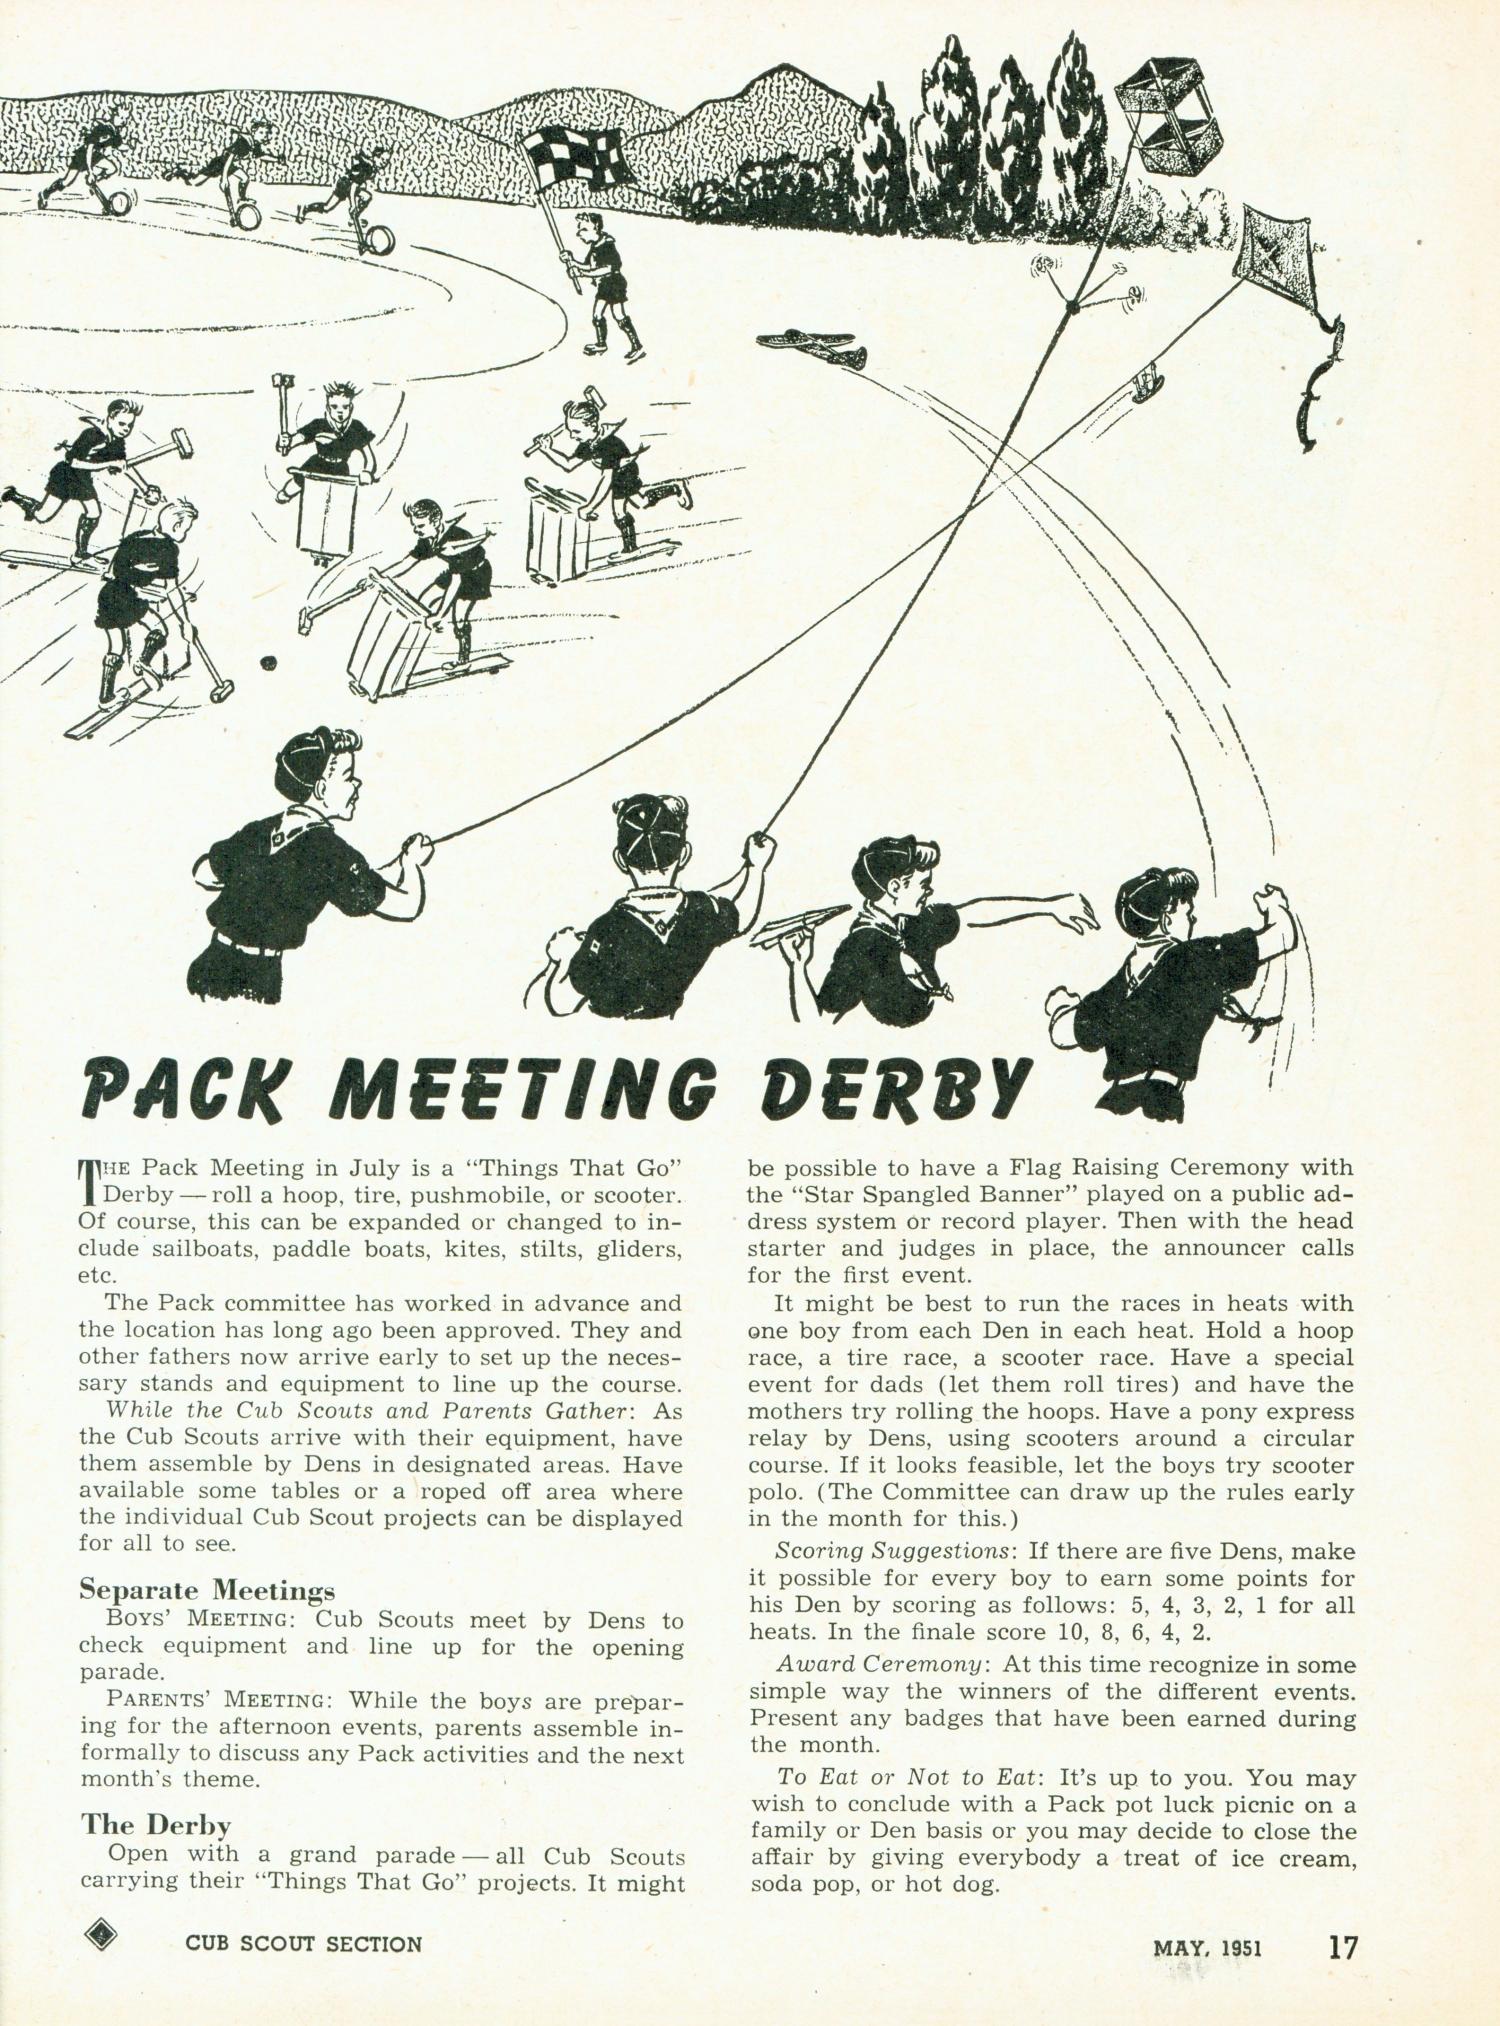 Scouting, Volume 39, Number 5, May 1951
                                                
                                                    17
                                                